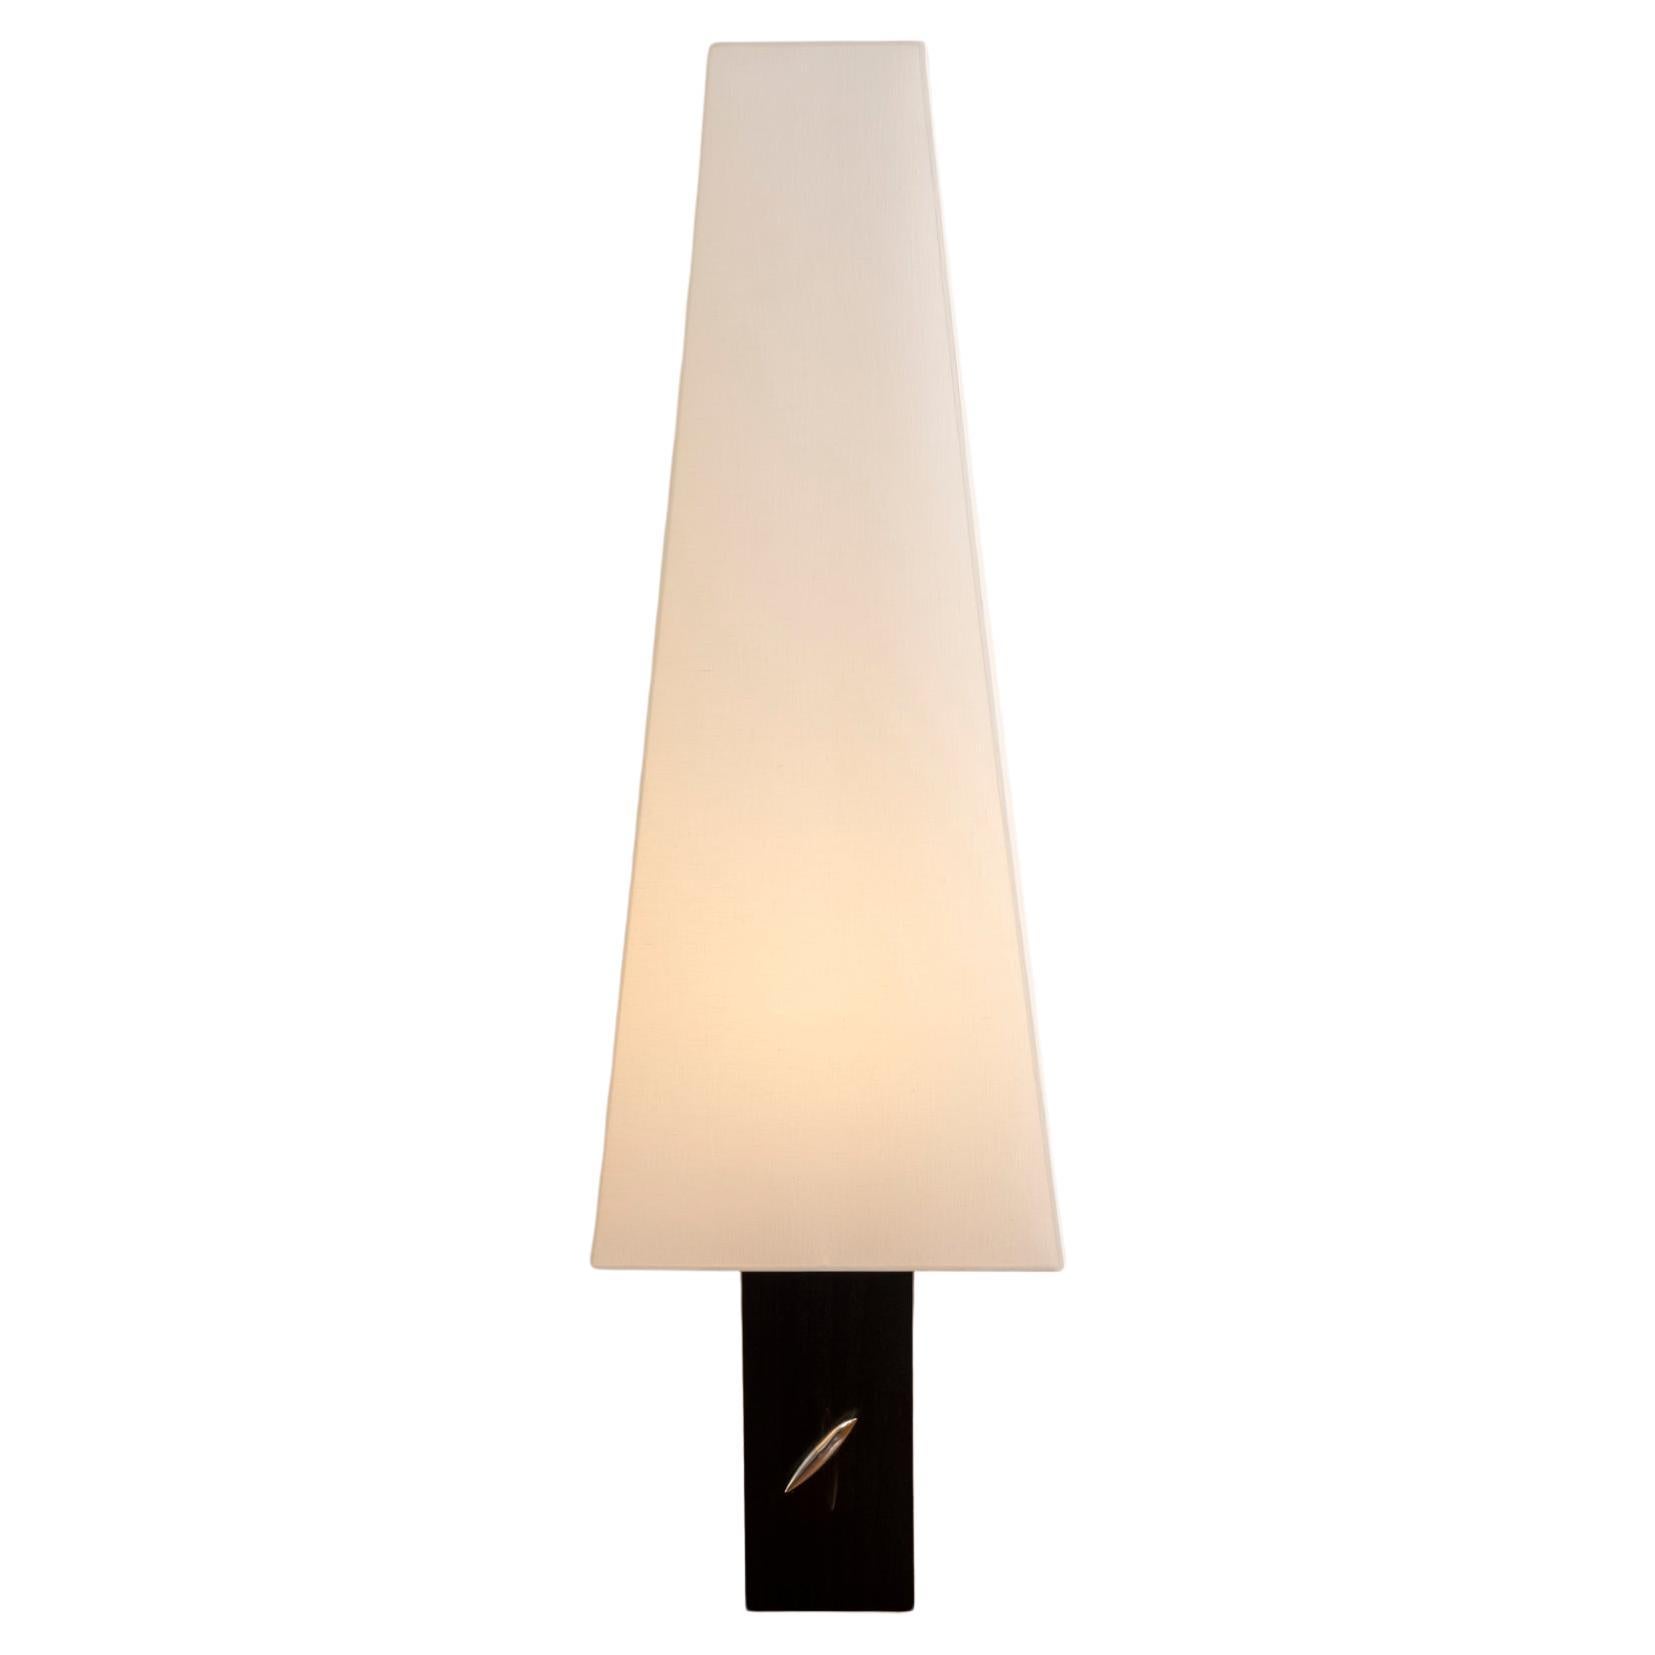 Floor Lamp with Ivory Linen Shade atop Black-painted Maple and Boxwood Trim Base